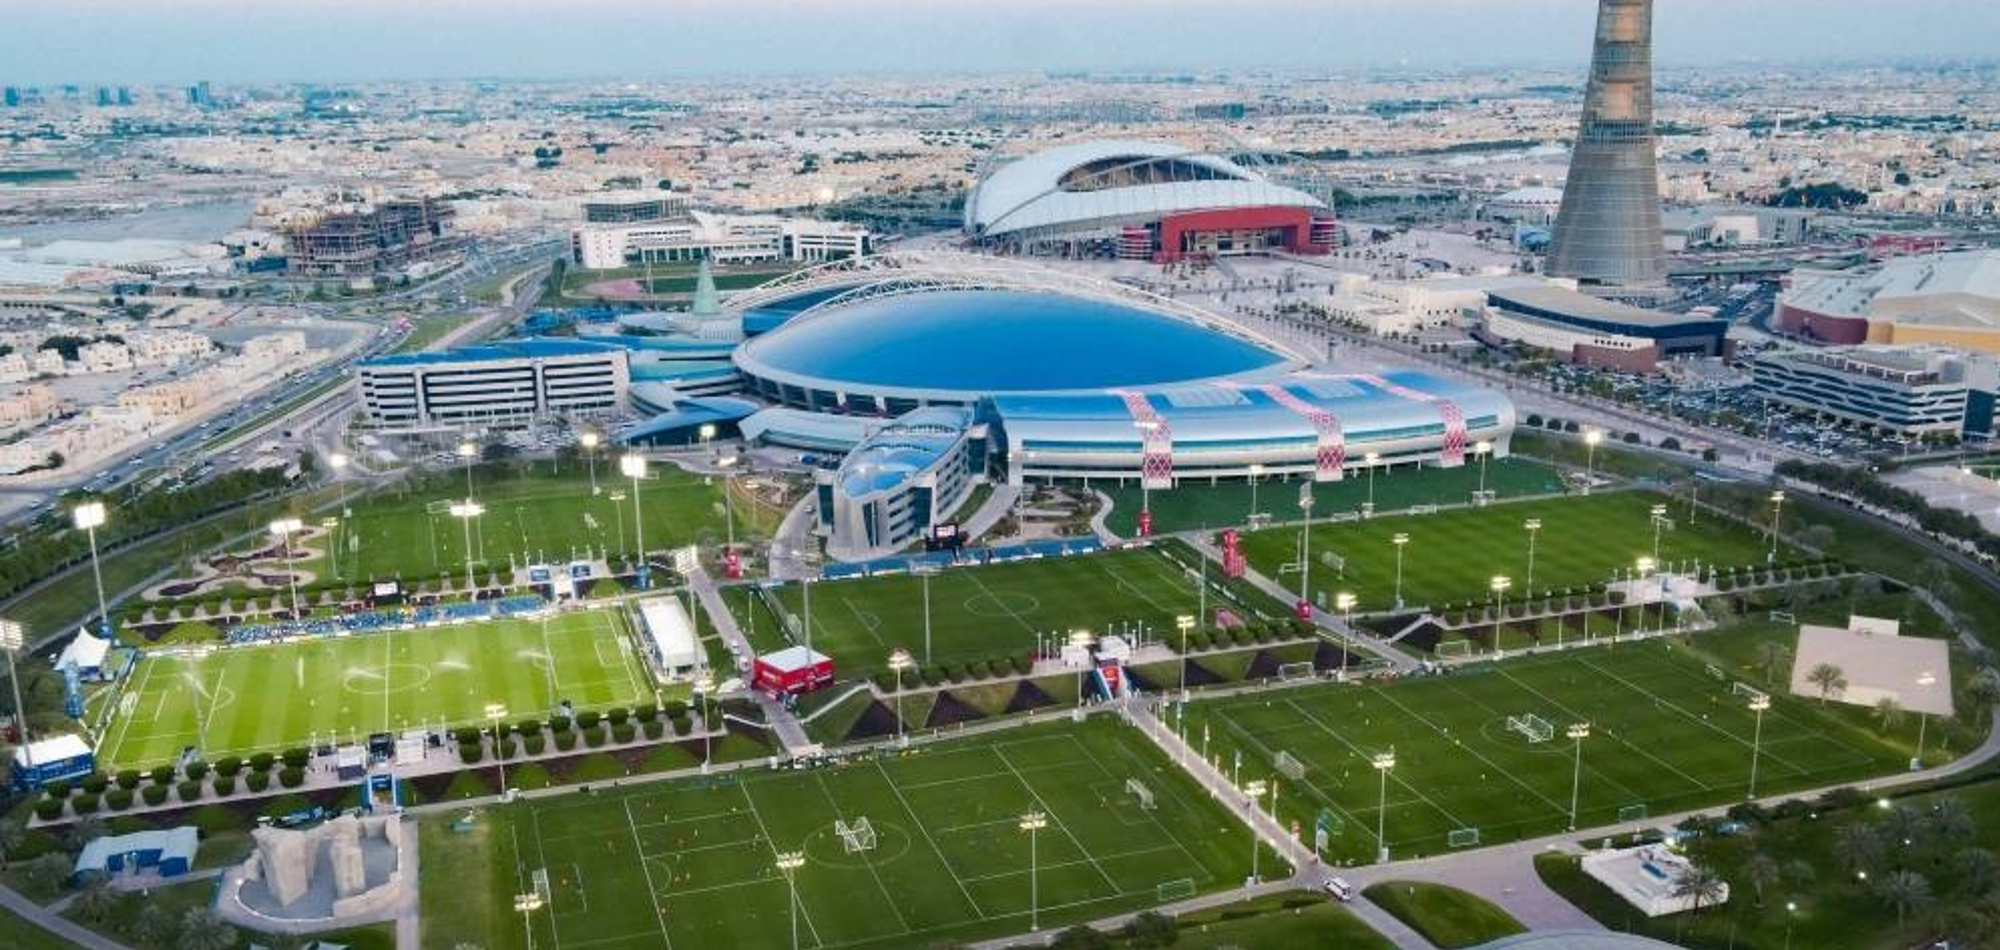 Aspire Academy playing a key role in Qatar’s hosting of FIFA World Cup